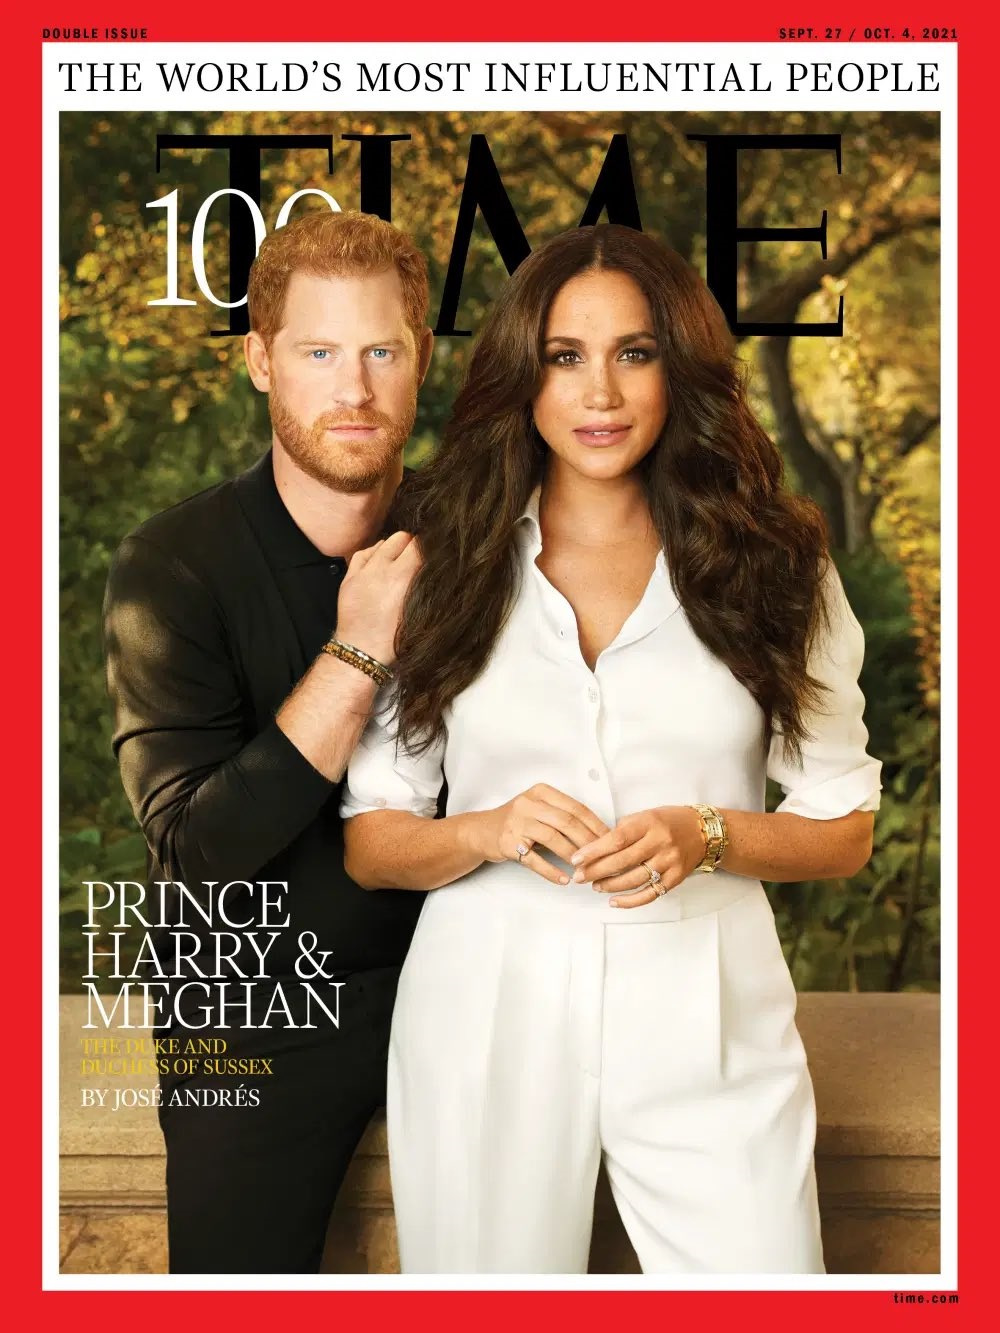 Meghan and Harry have made the TIME100 list